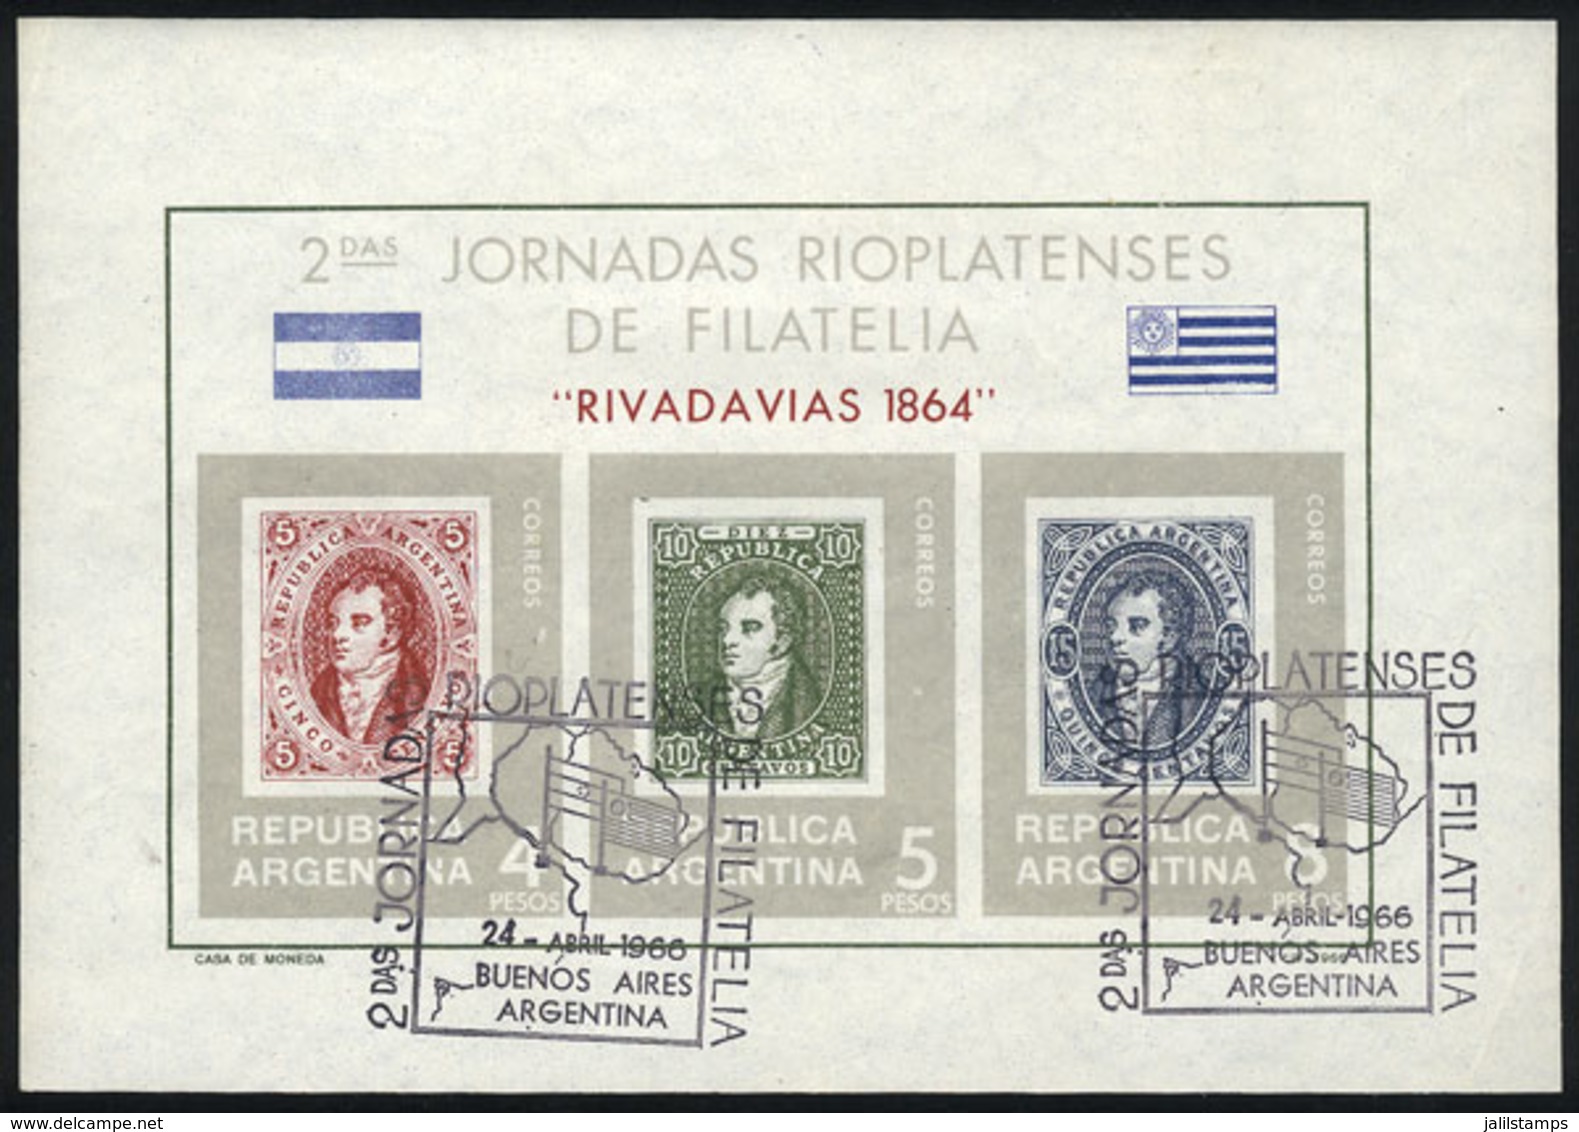 ARGENTINA: GJ.HB 20, River Plate Philatelic Meeting, With Special Postmarks, Fine Quality - Hojas Bloque